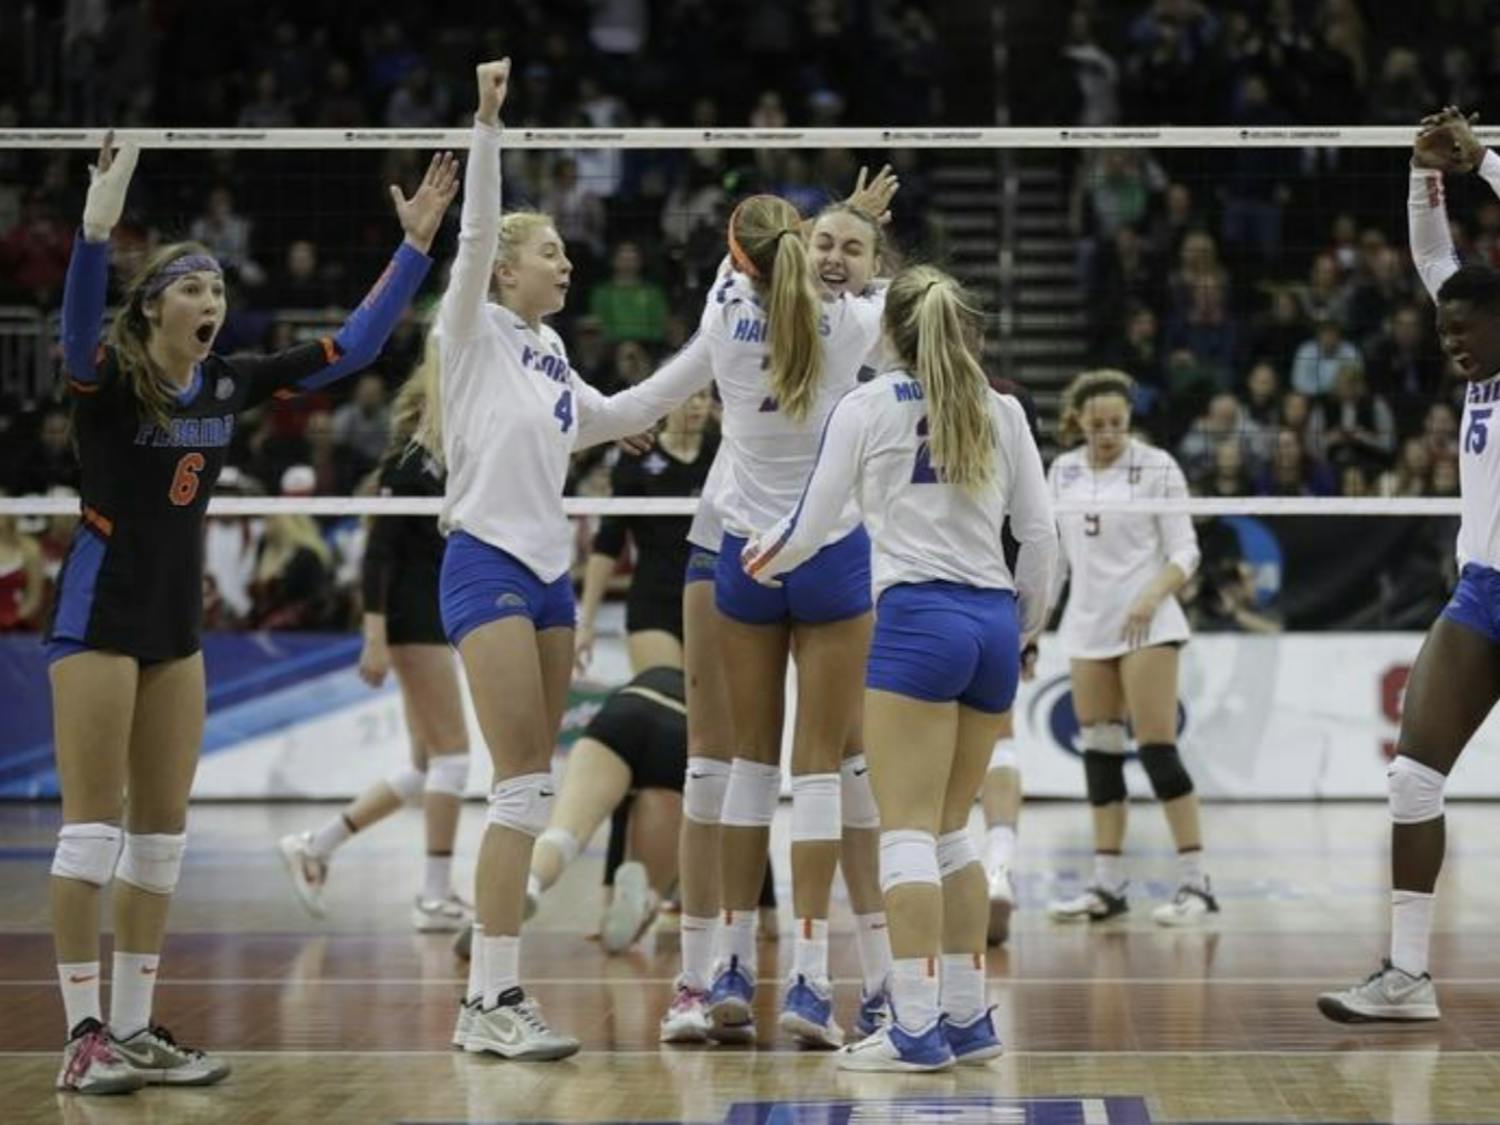 Despite coming up short in the national championship match, the 2017 Florida volleyball team had a season to remember.